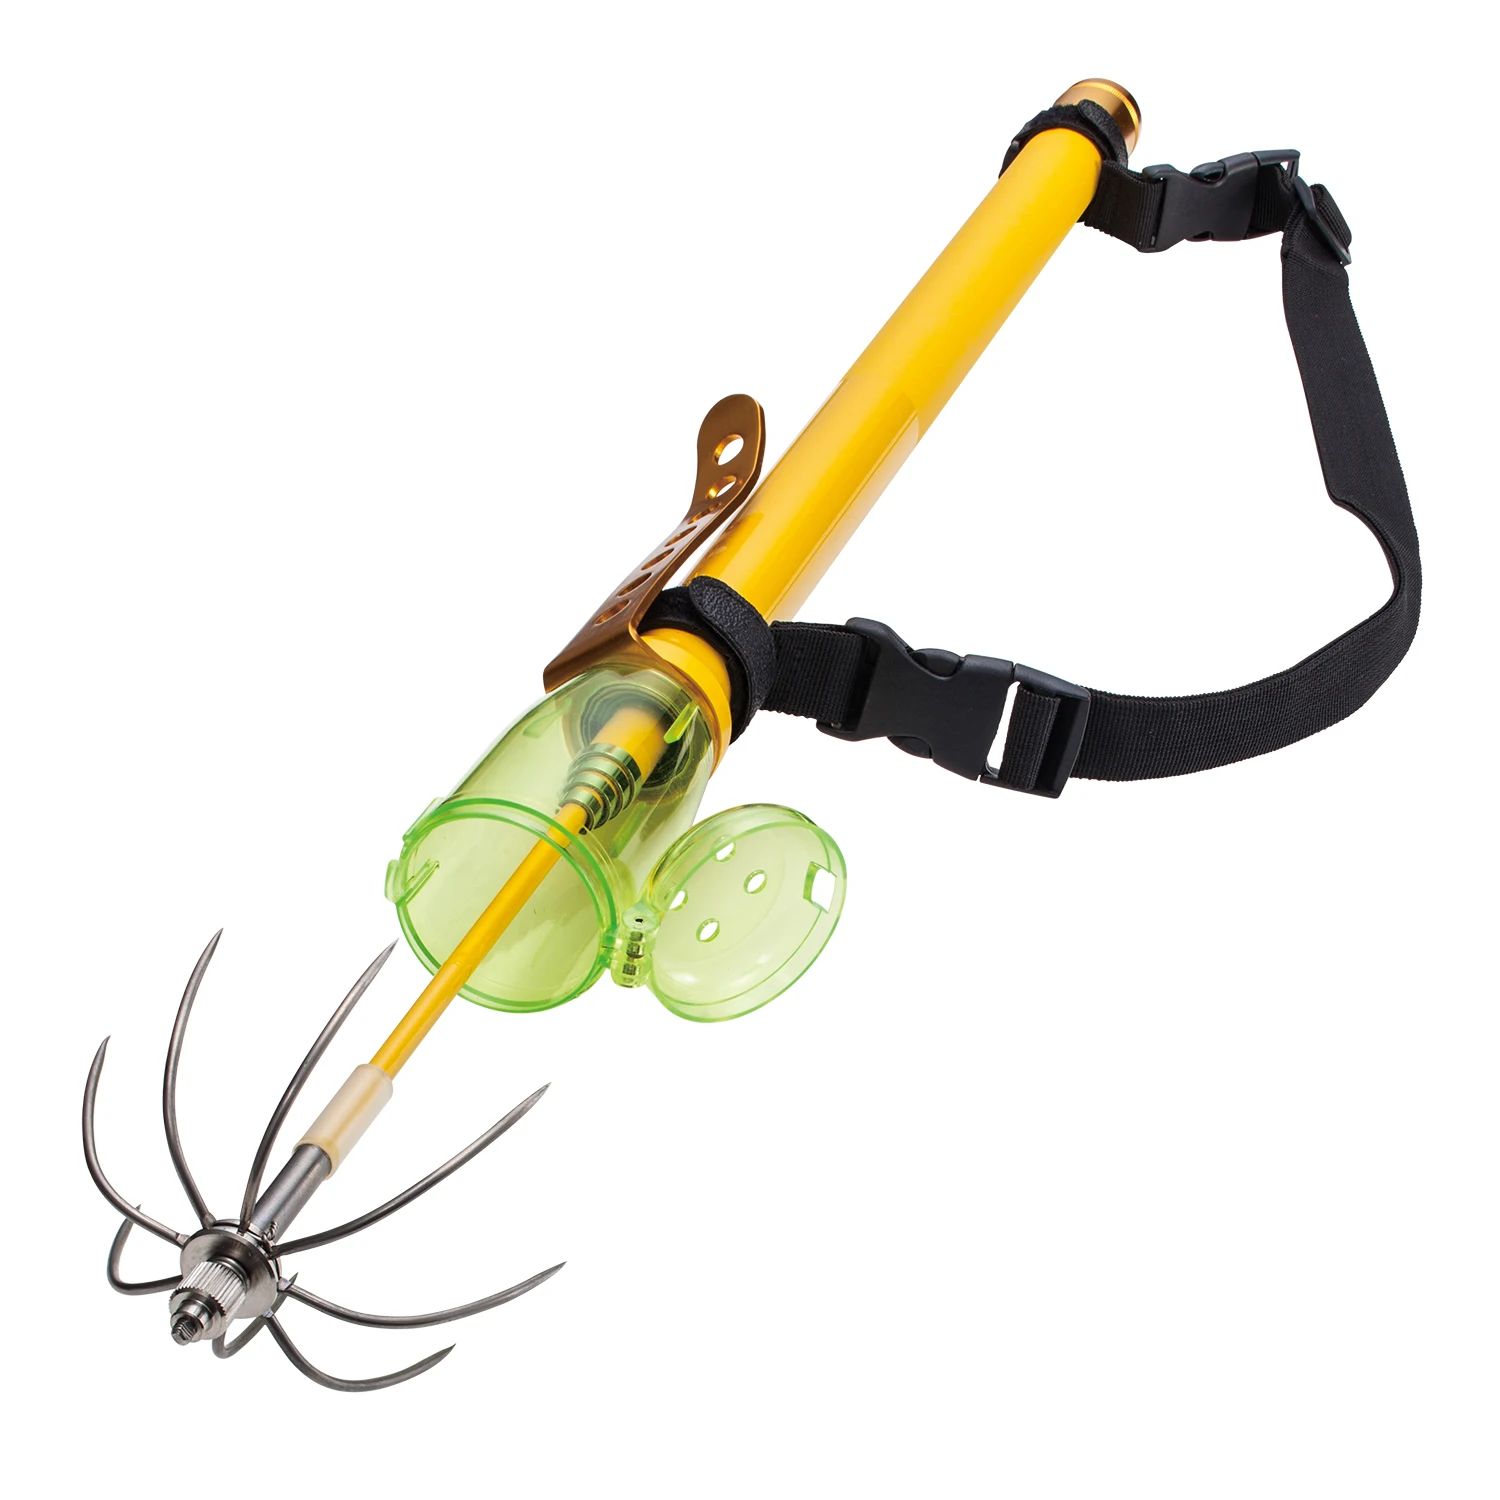 Japan outdoor sports portable safety catch